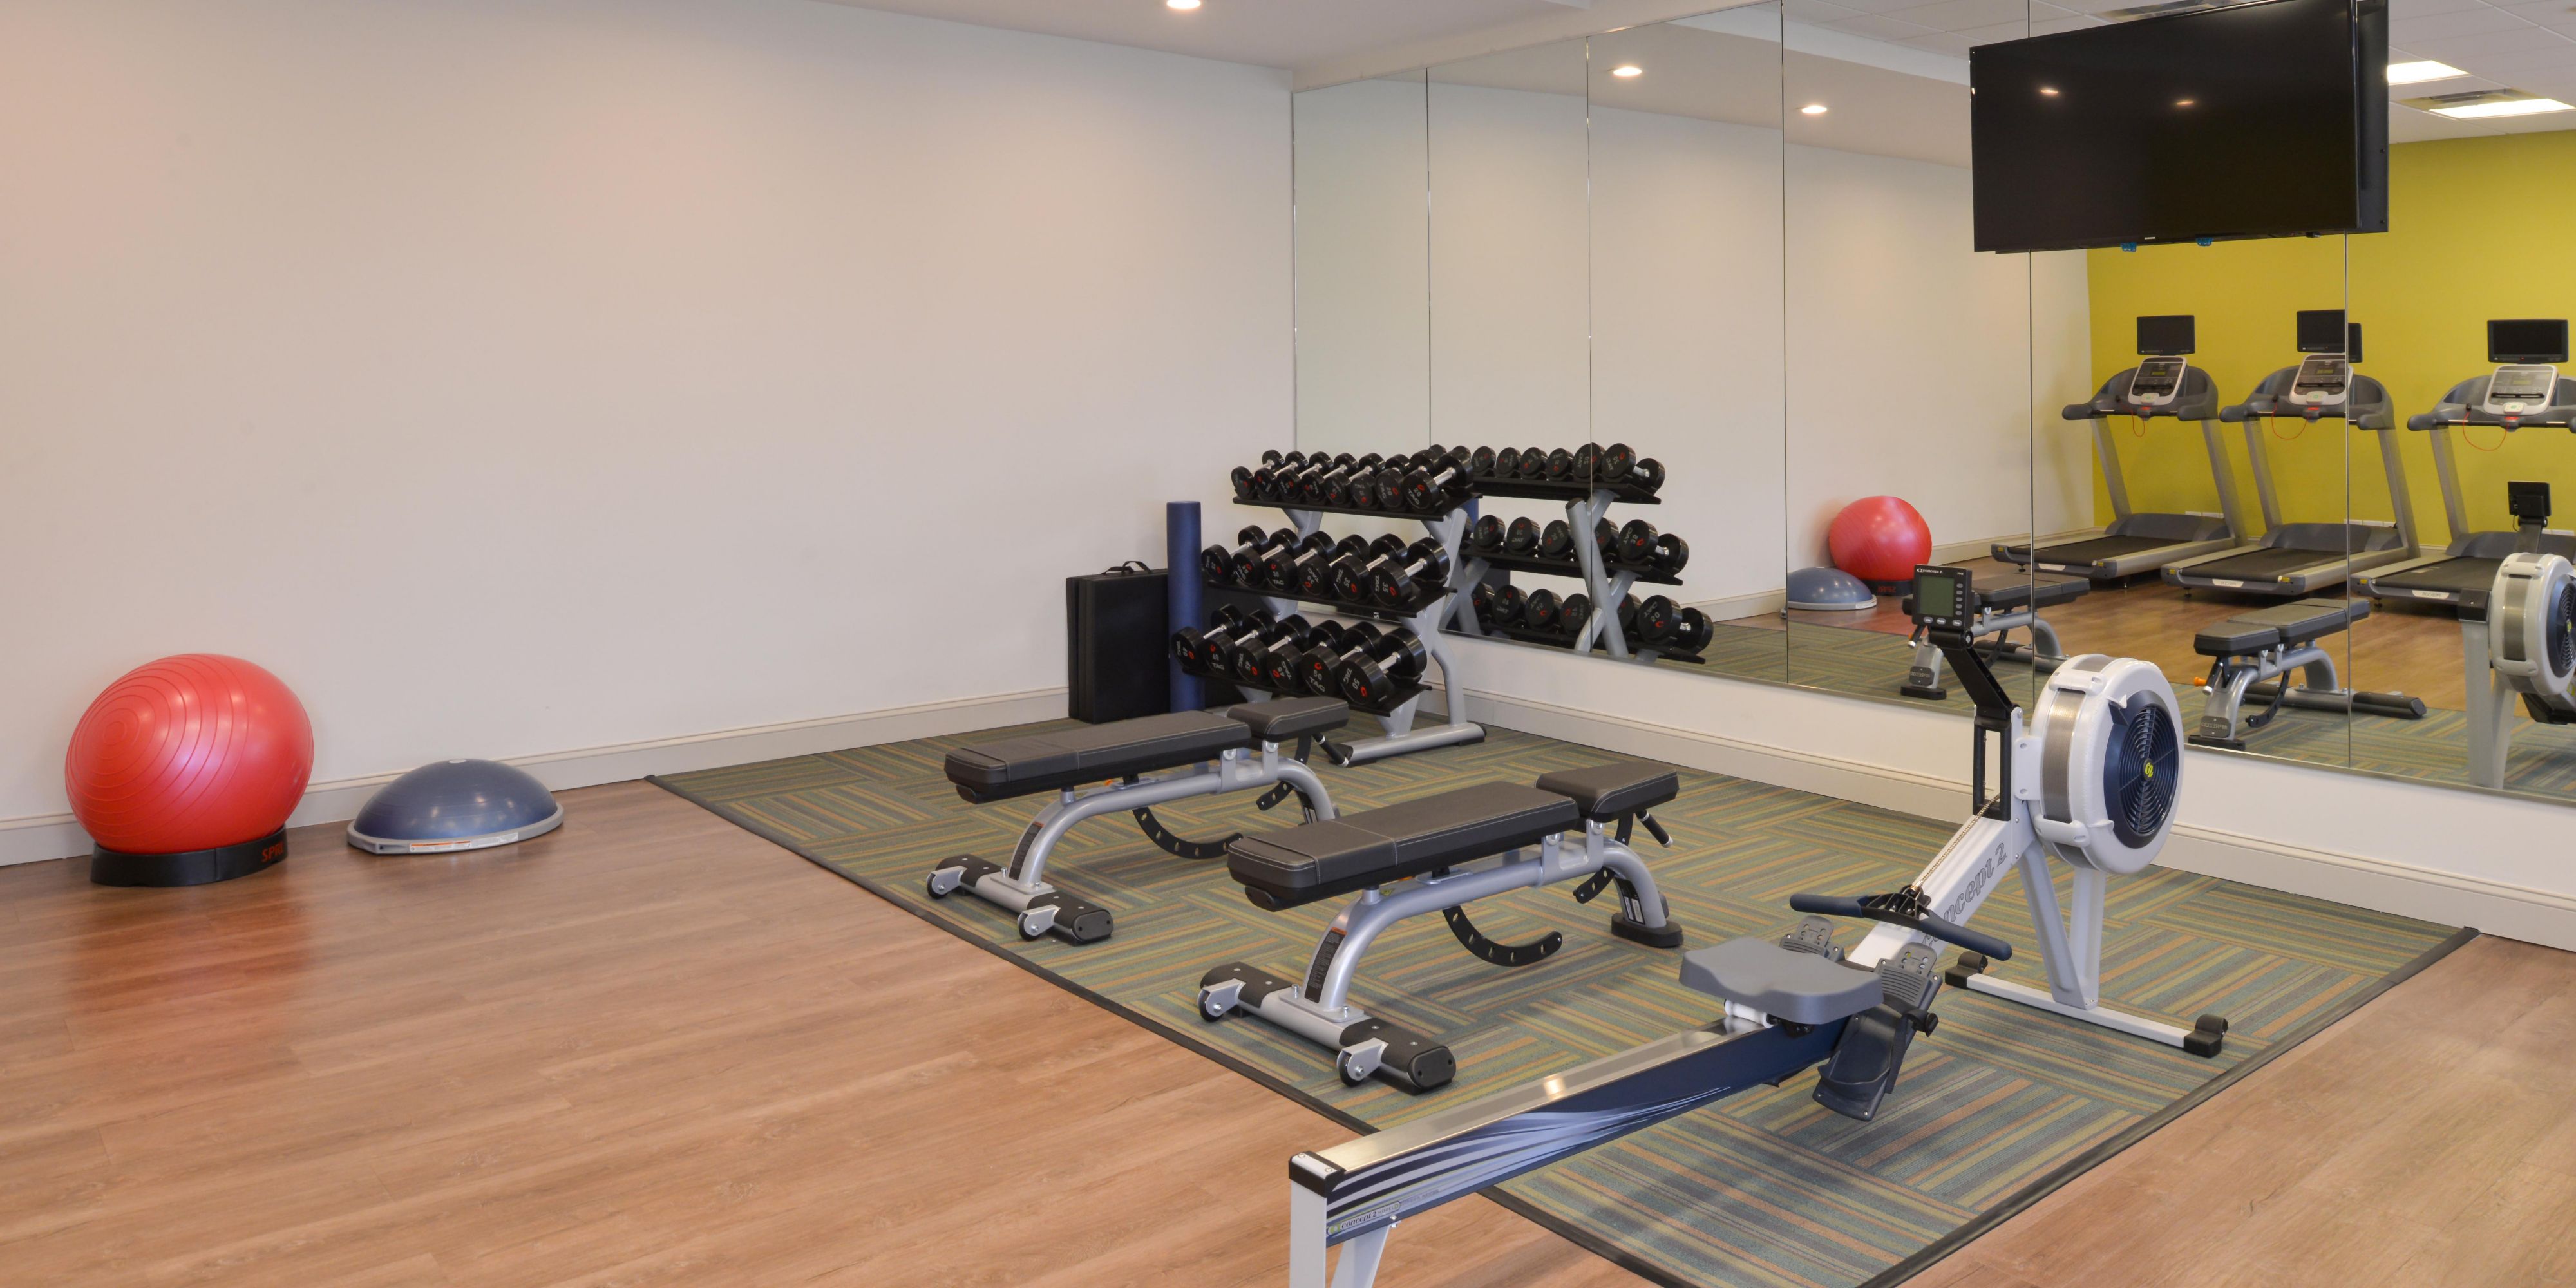 Get your sweat on in our complimentary, fully equipped fitness center with a Rower, Treadmill, Elliptical Machines, Free Weights, Stationary Bicycle and more open 24 hours for your convenience.

